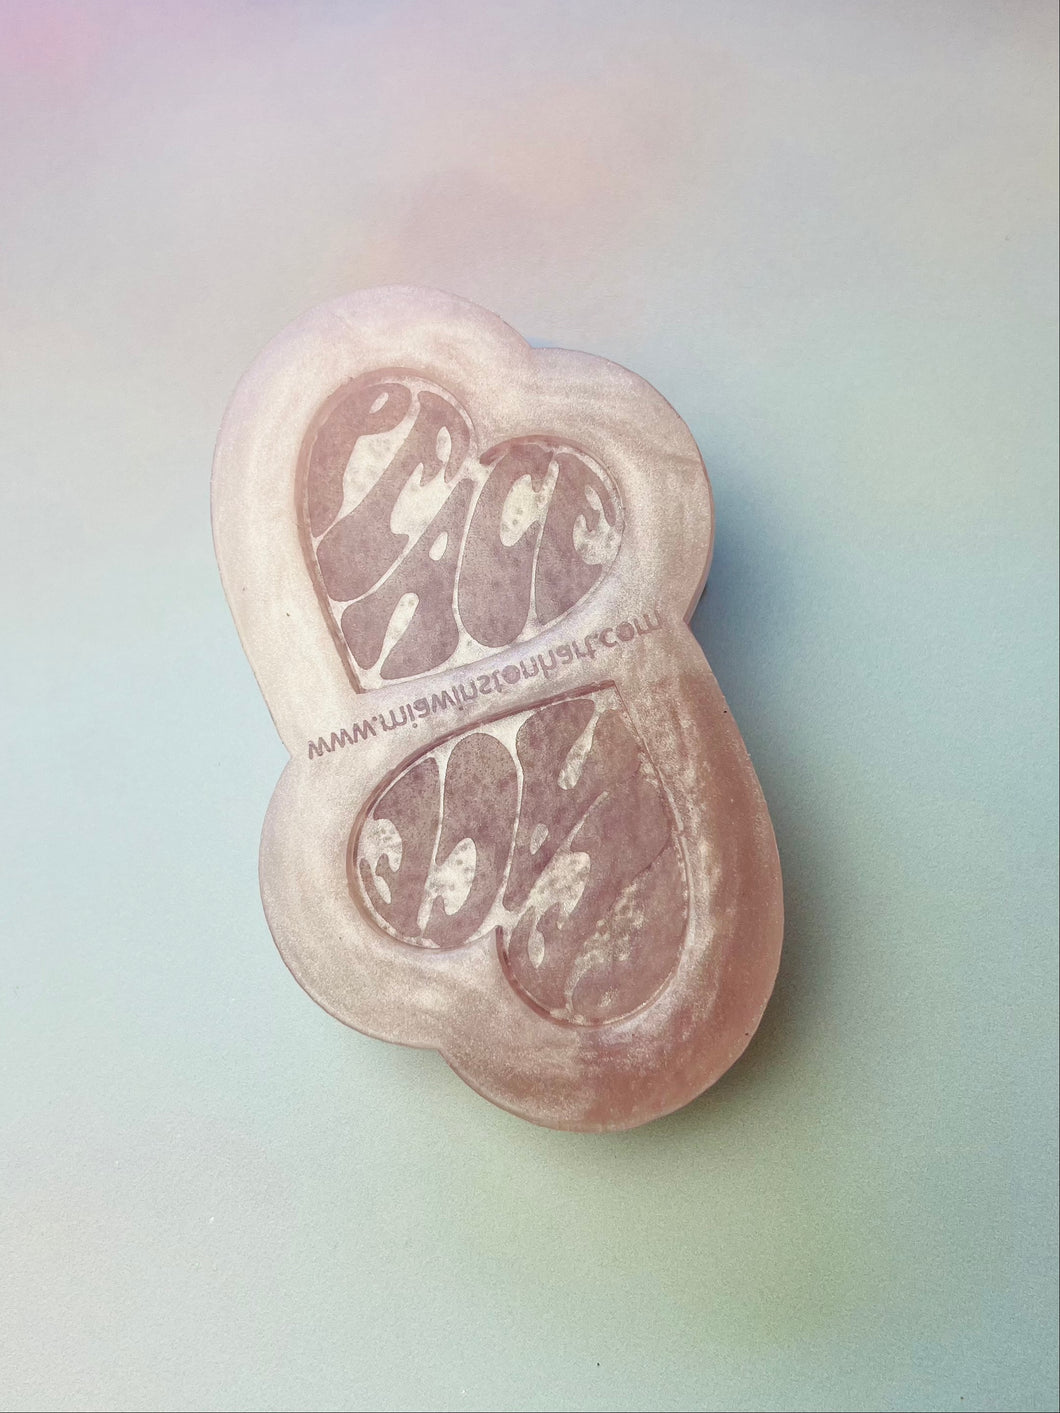 70s peace heart earring silicone mould